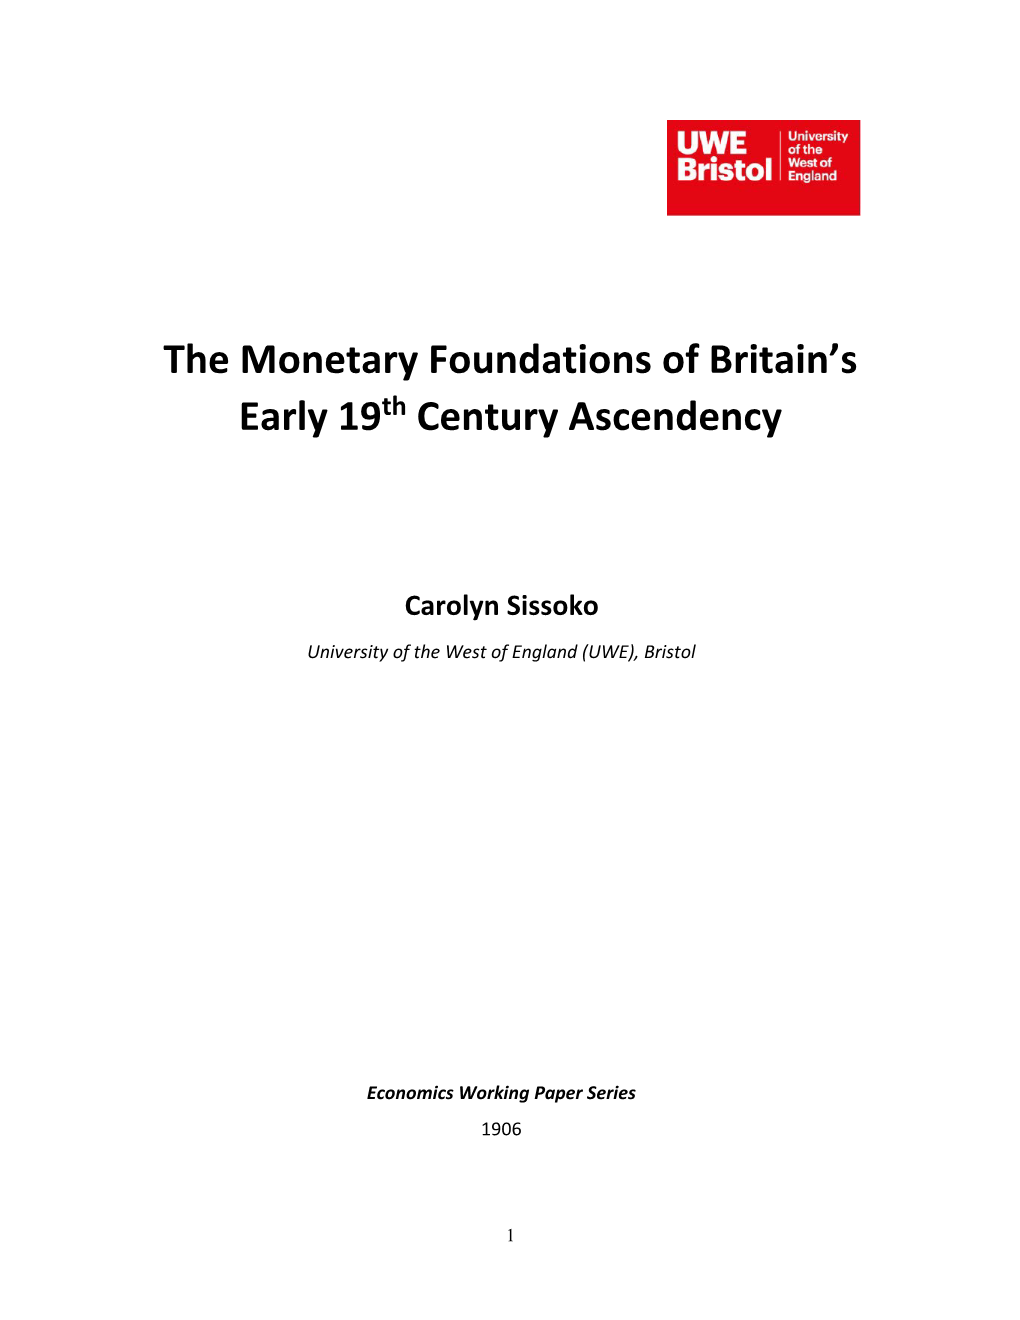 The Monetary Foundations of Britain's Early 19Th Century Ascendency